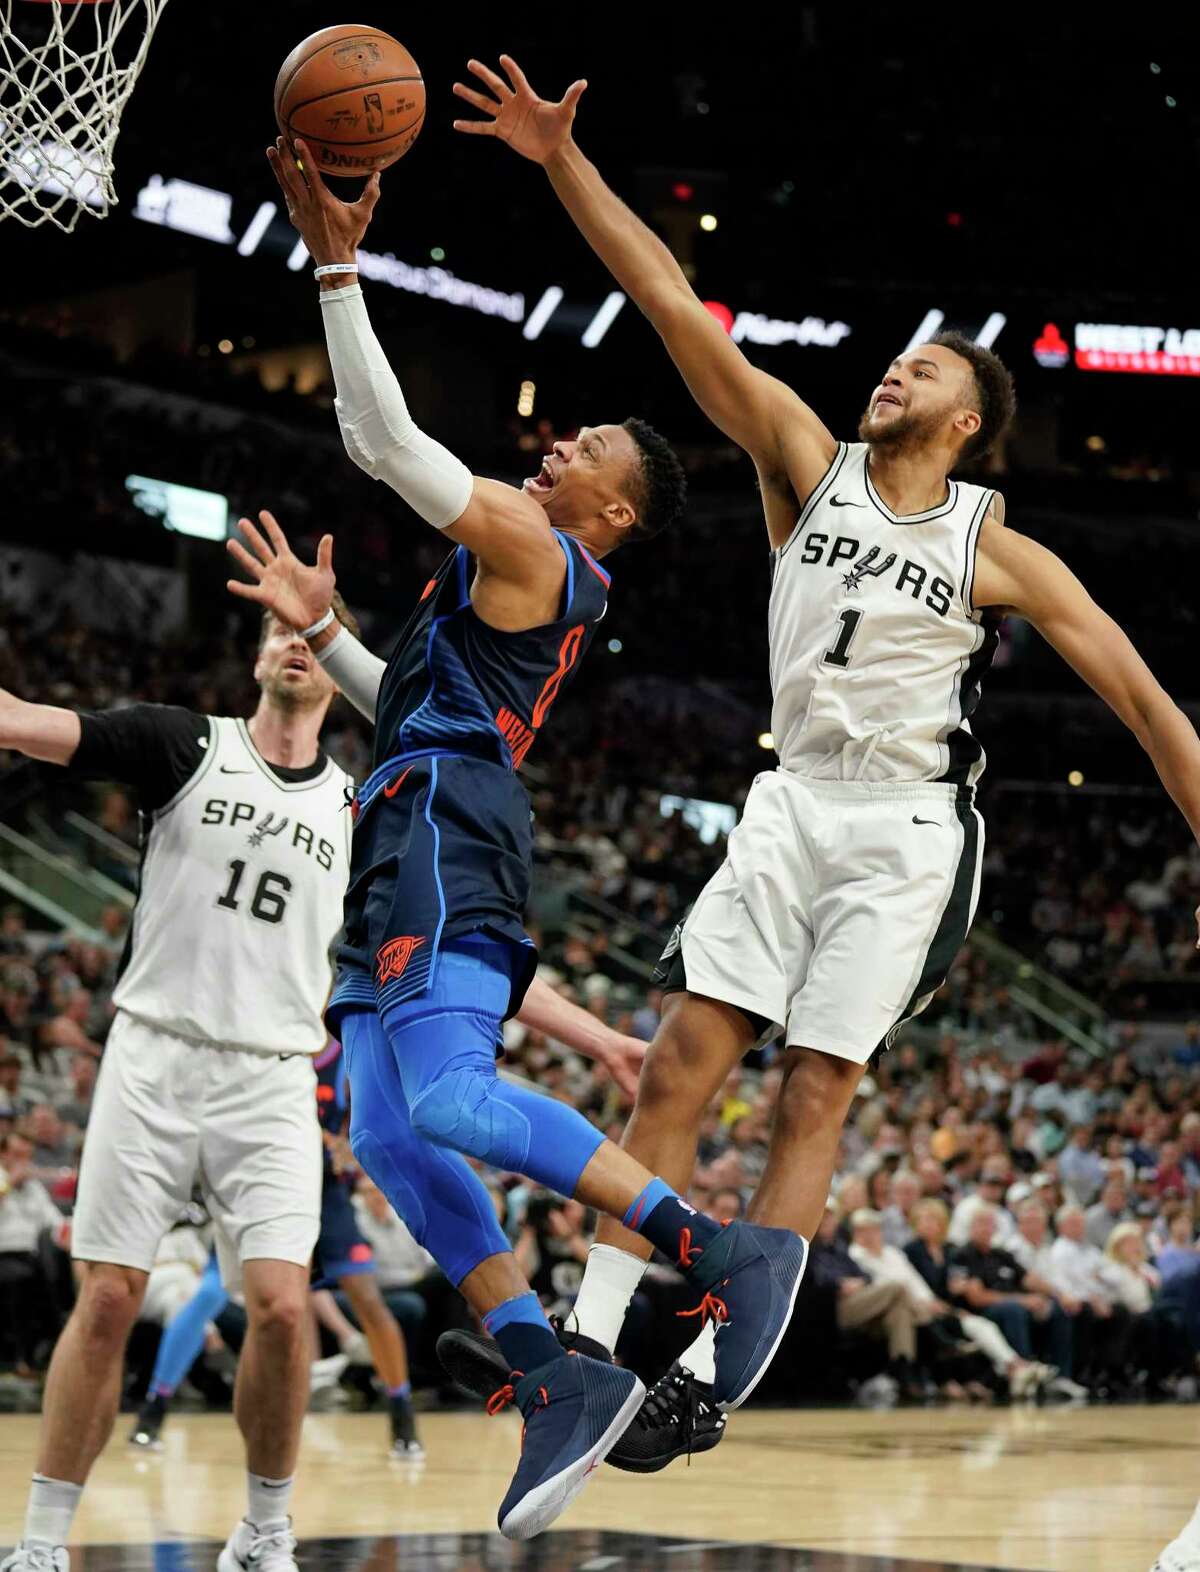 Oklahoma City Thunder's Russell Westbrook, center, shoots against San Antonio Spurs' Kyle Anderson (1) and Pau Gasol during the first half of an NBA basketball game Thursday, March 29, 2018, in San Antonio. (AP Photo/Darren Abate)